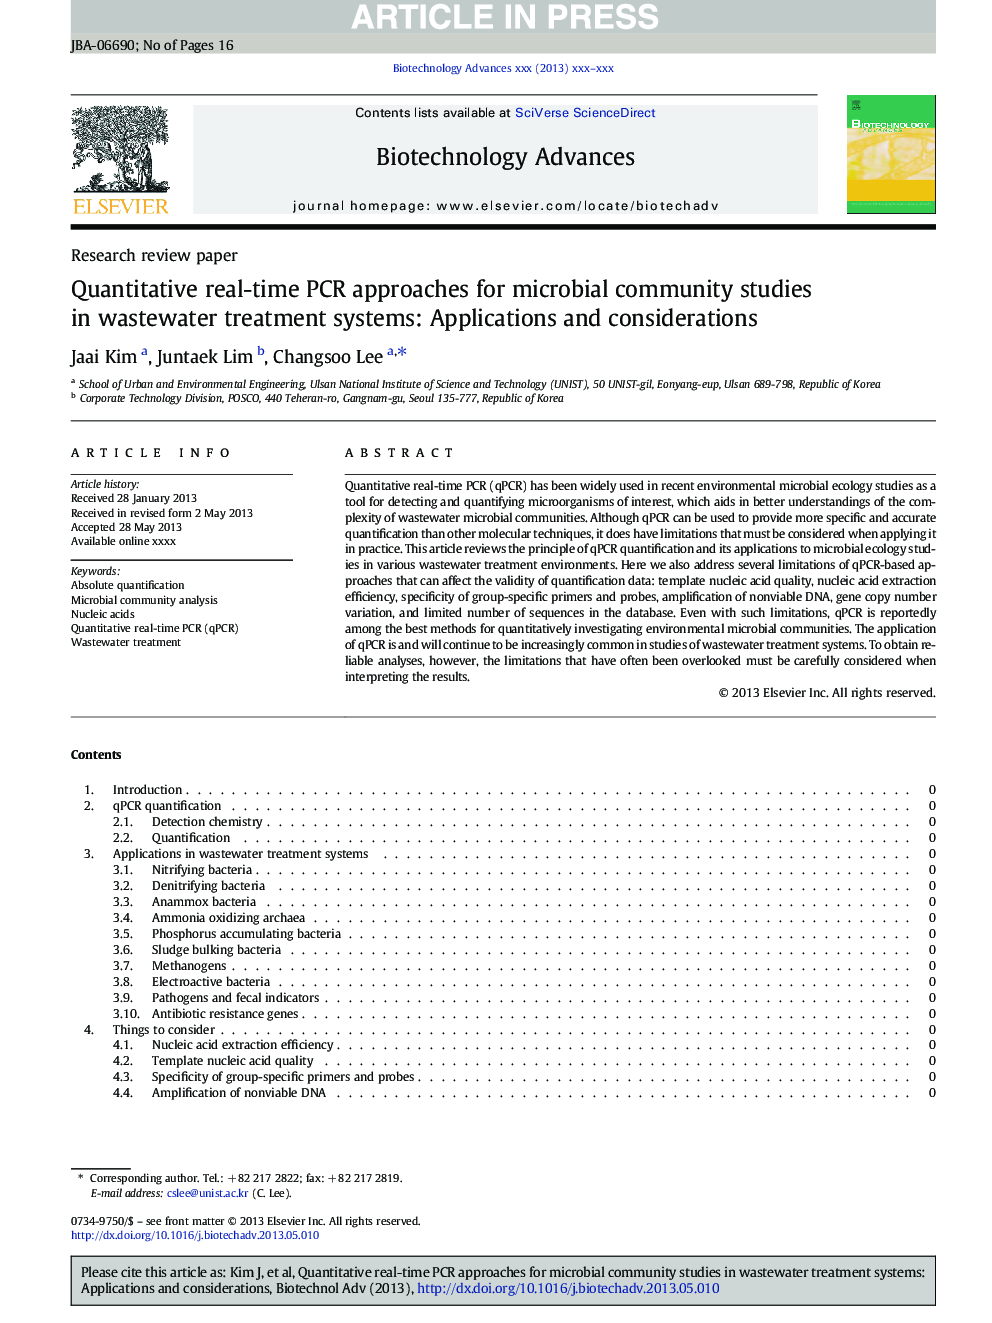 Quantitative real-time PCR approaches for microbial community studies in wastewater treatment systems: Applications and considerations